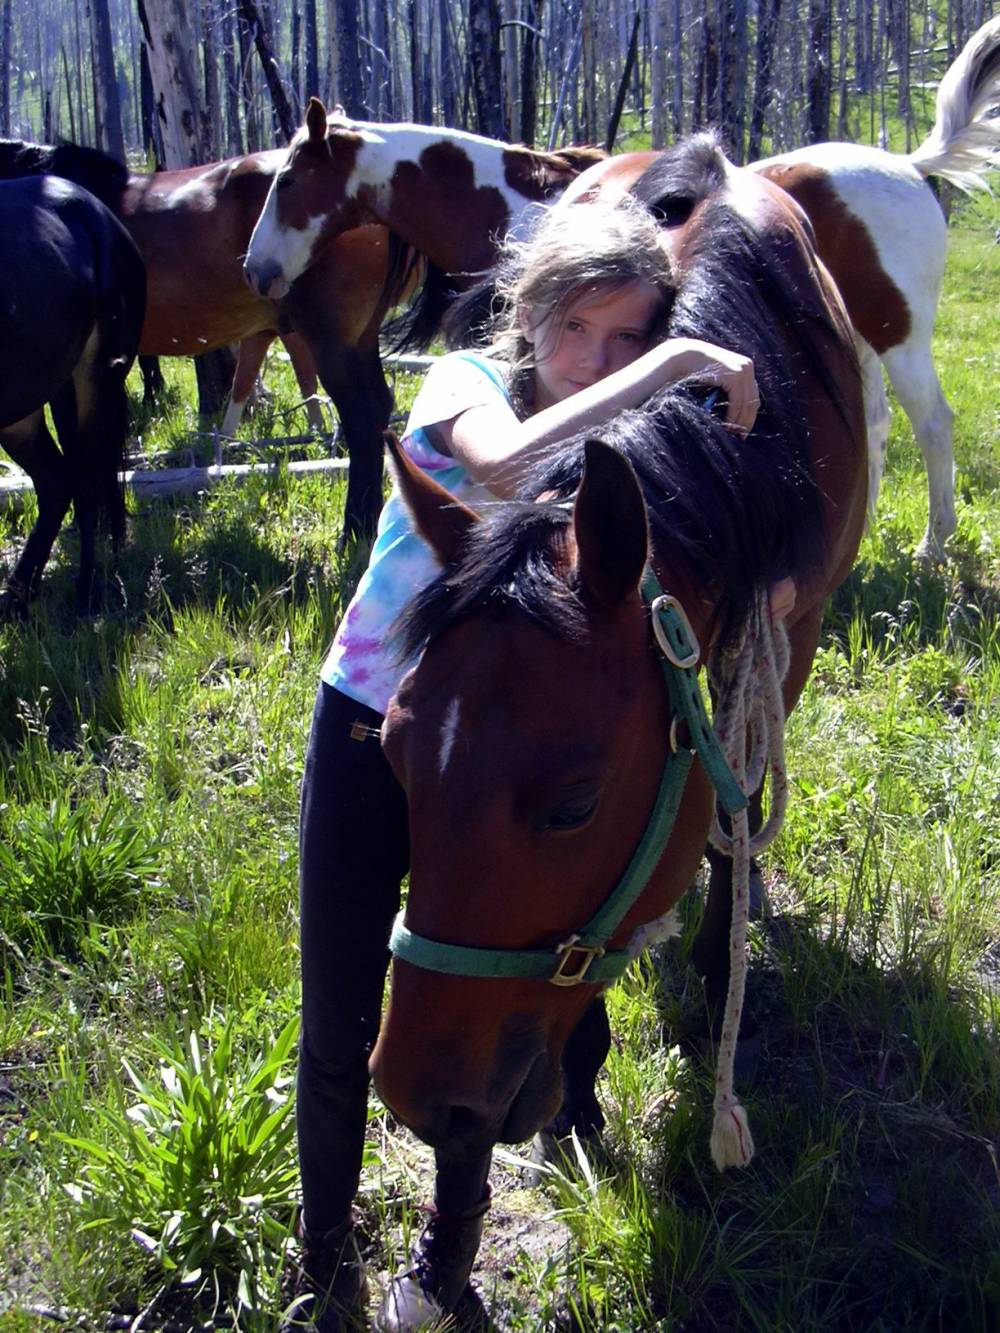 TOP WYOMING HORSE RIDING CAMP: Bedroll and Breakfast is a Top Horse Riding Summer Camp located in Jackson Wyoming offering many fun and enriching Horse Riding and other camp programs. 